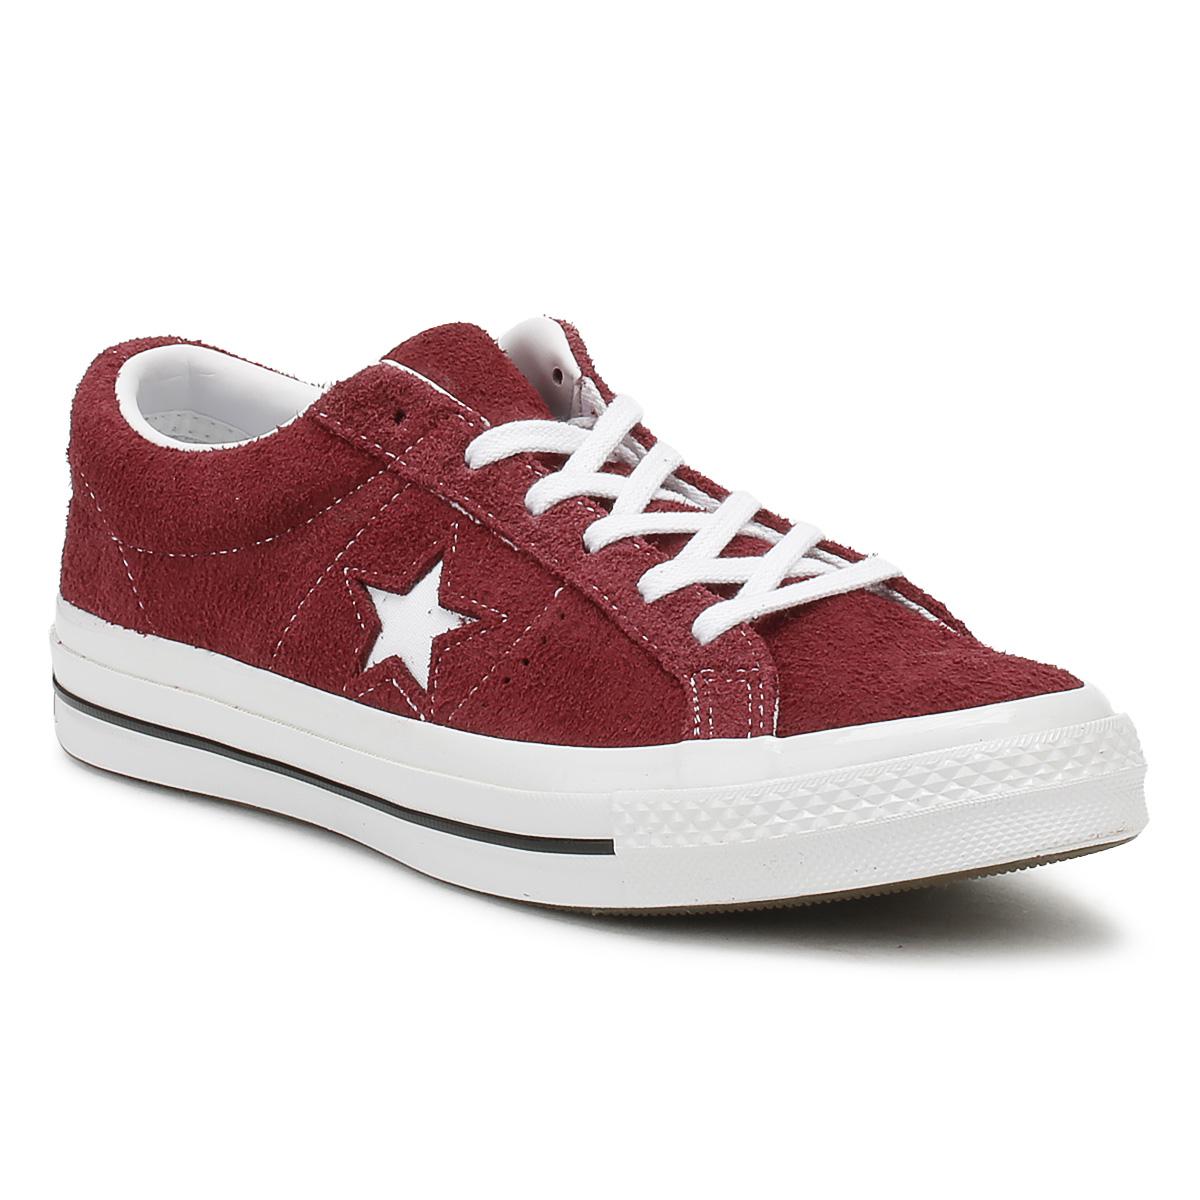 red suede one star converse